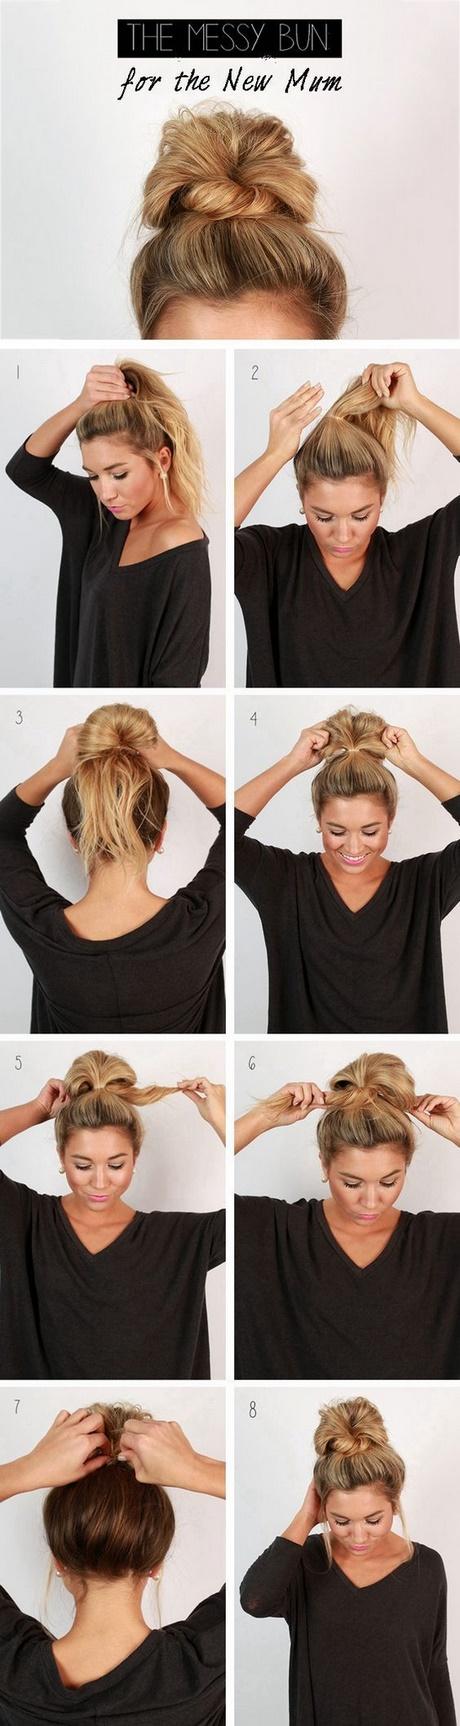 Quick cute easy hairstyles quick-cute-easy-hairstyles-74_16